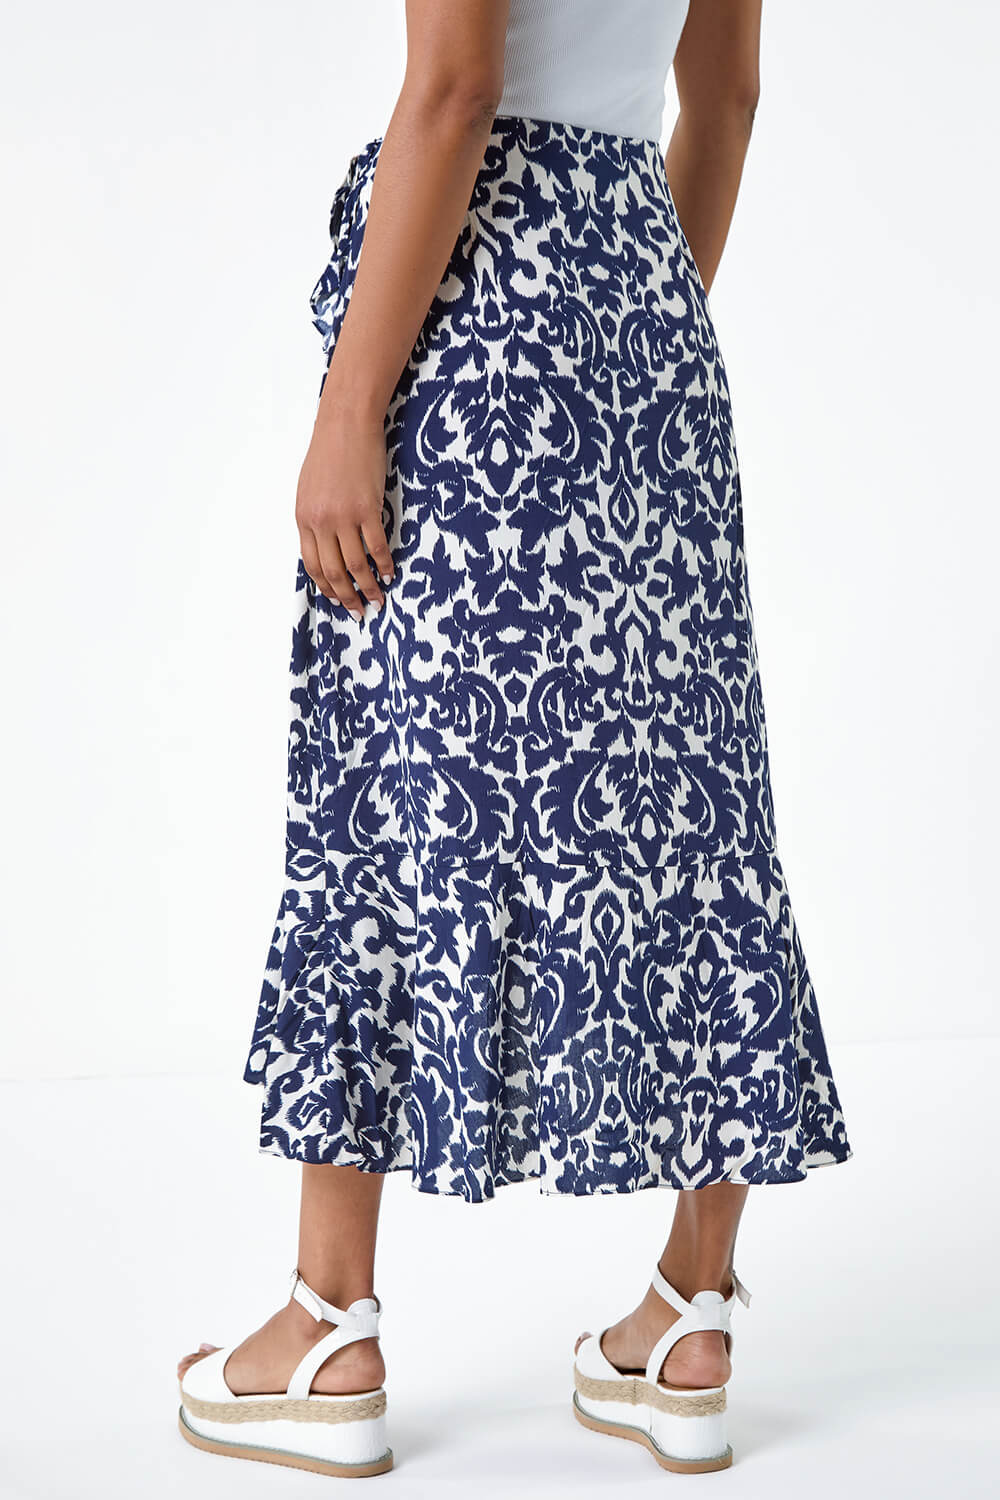 Blue Frill Abstract Print A line Wrap Skirt, Image 2 of 2